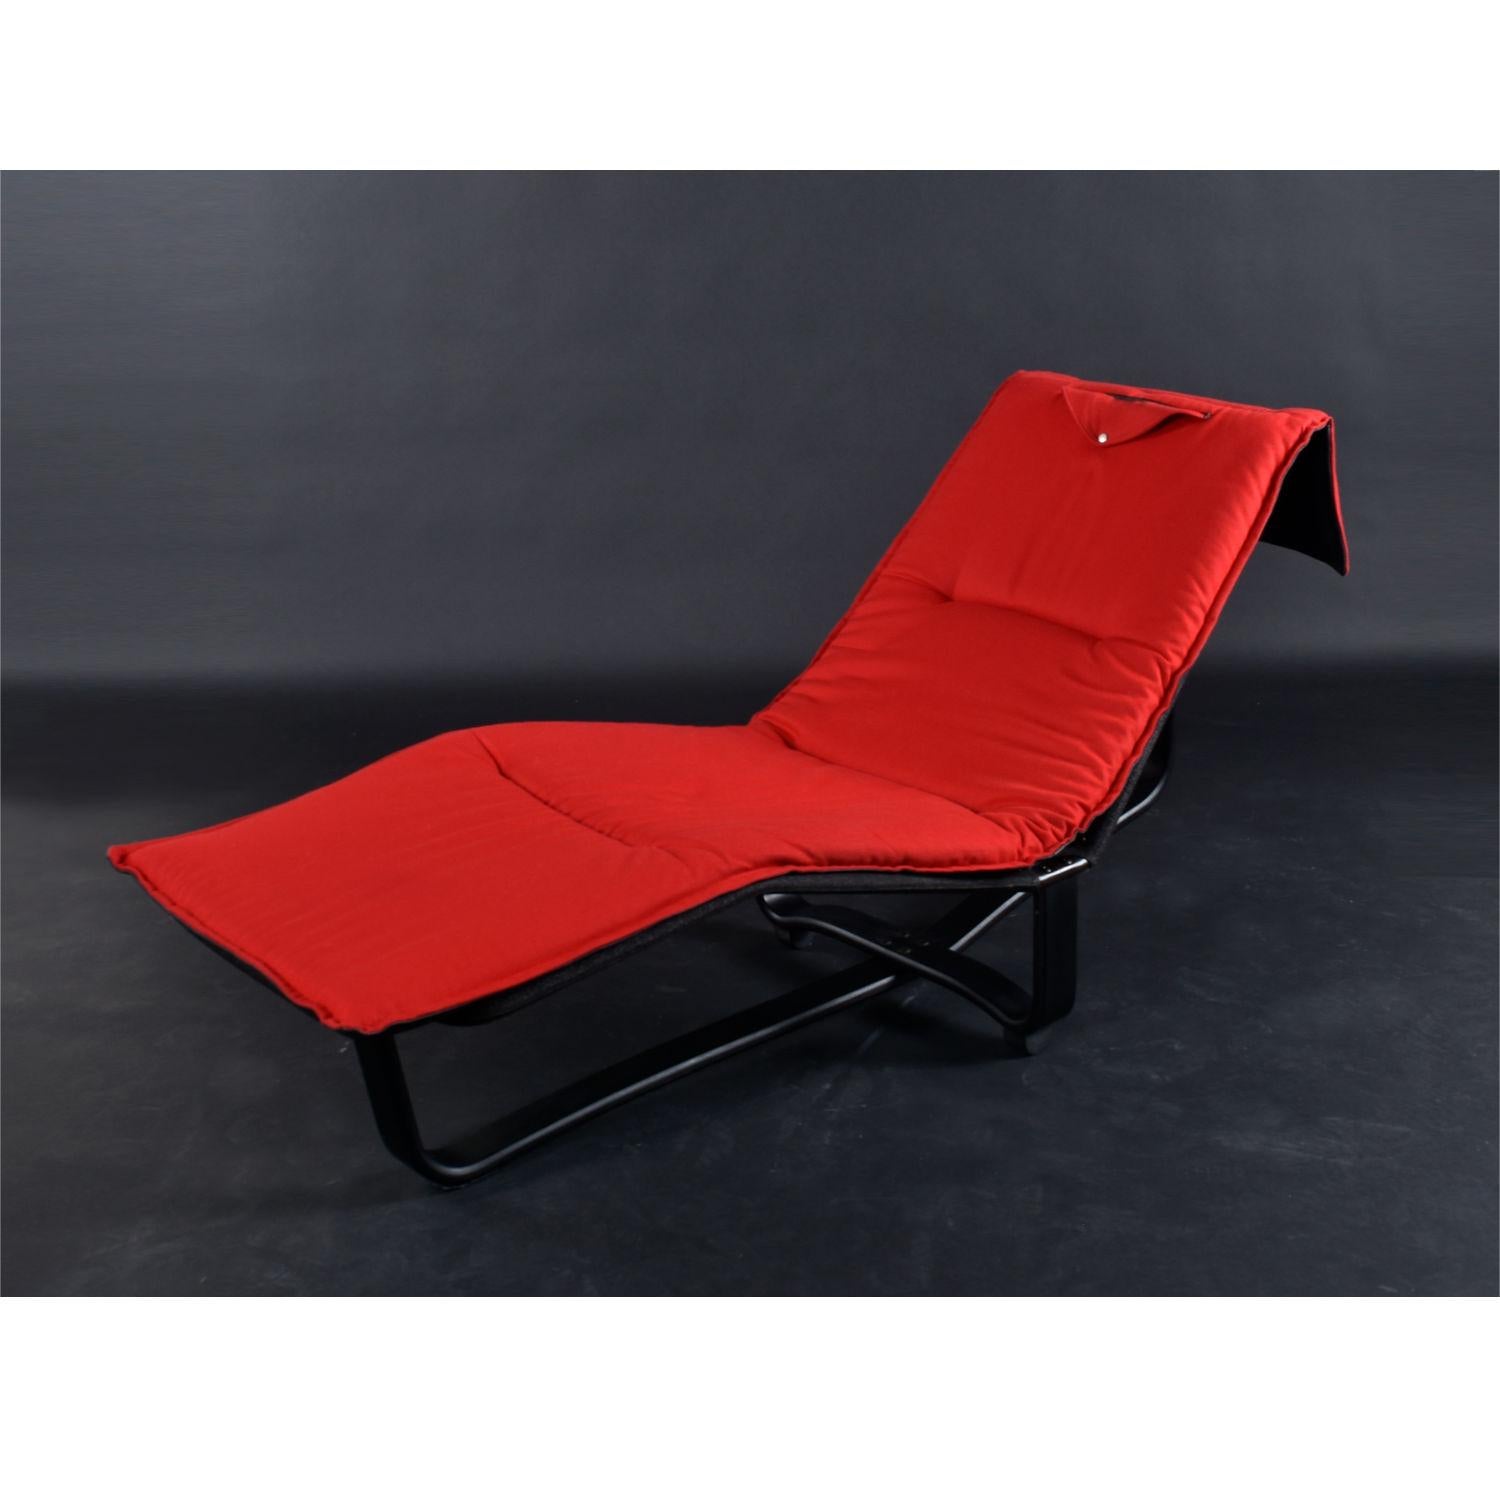 Westnofa Norwegian Black Leather and Red Wool Reversible Chaise Lounge In Excellent Condition For Sale In Chattanooga, TN